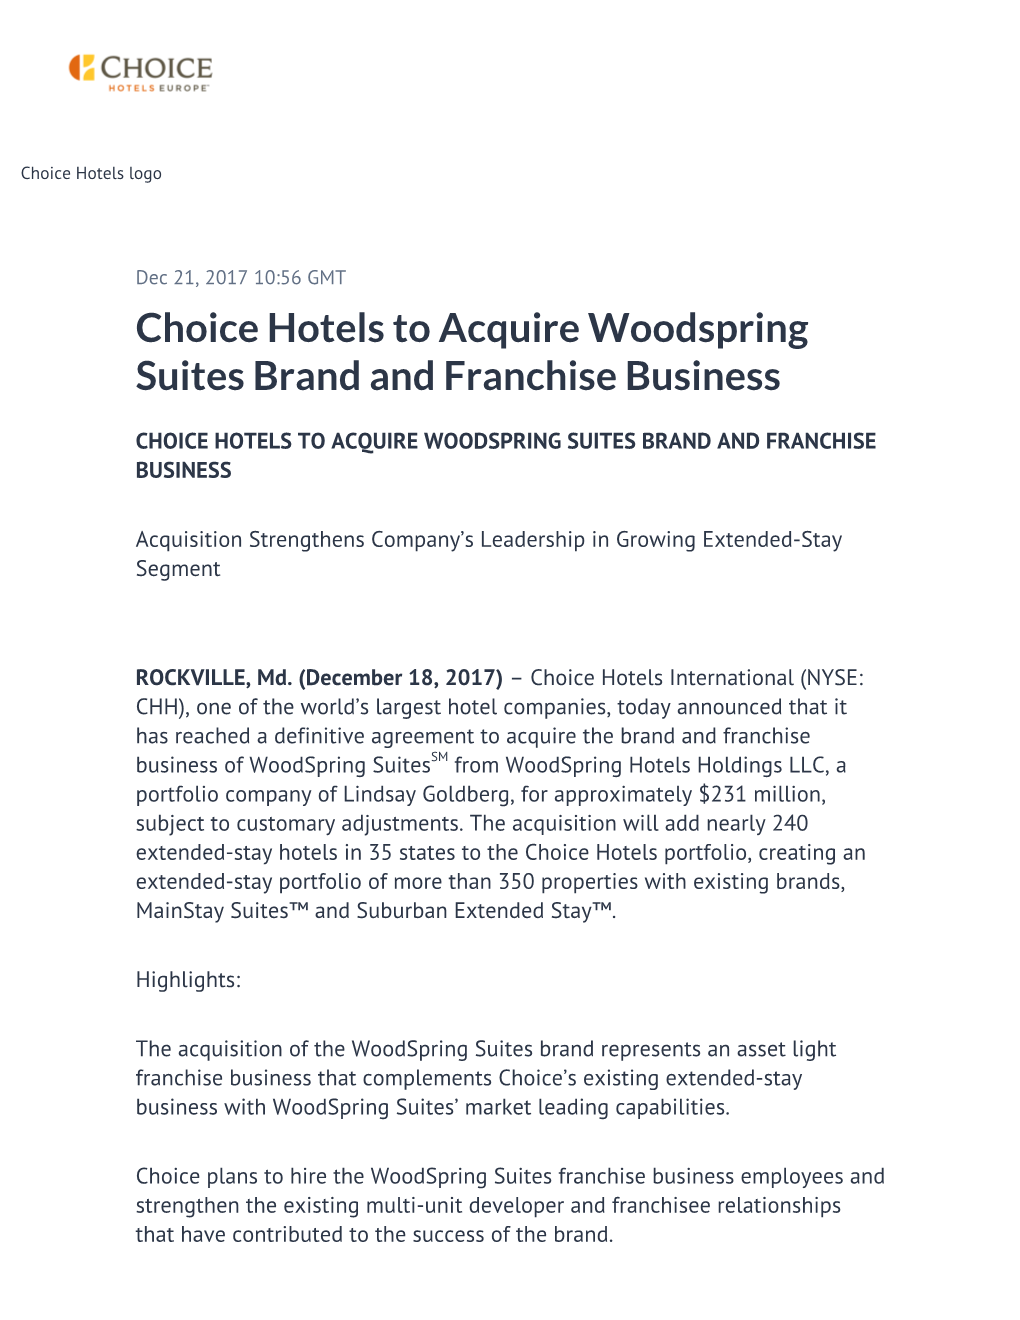 Choice Hotels to Acquire Woodspring Suites Brand and Franchise Business